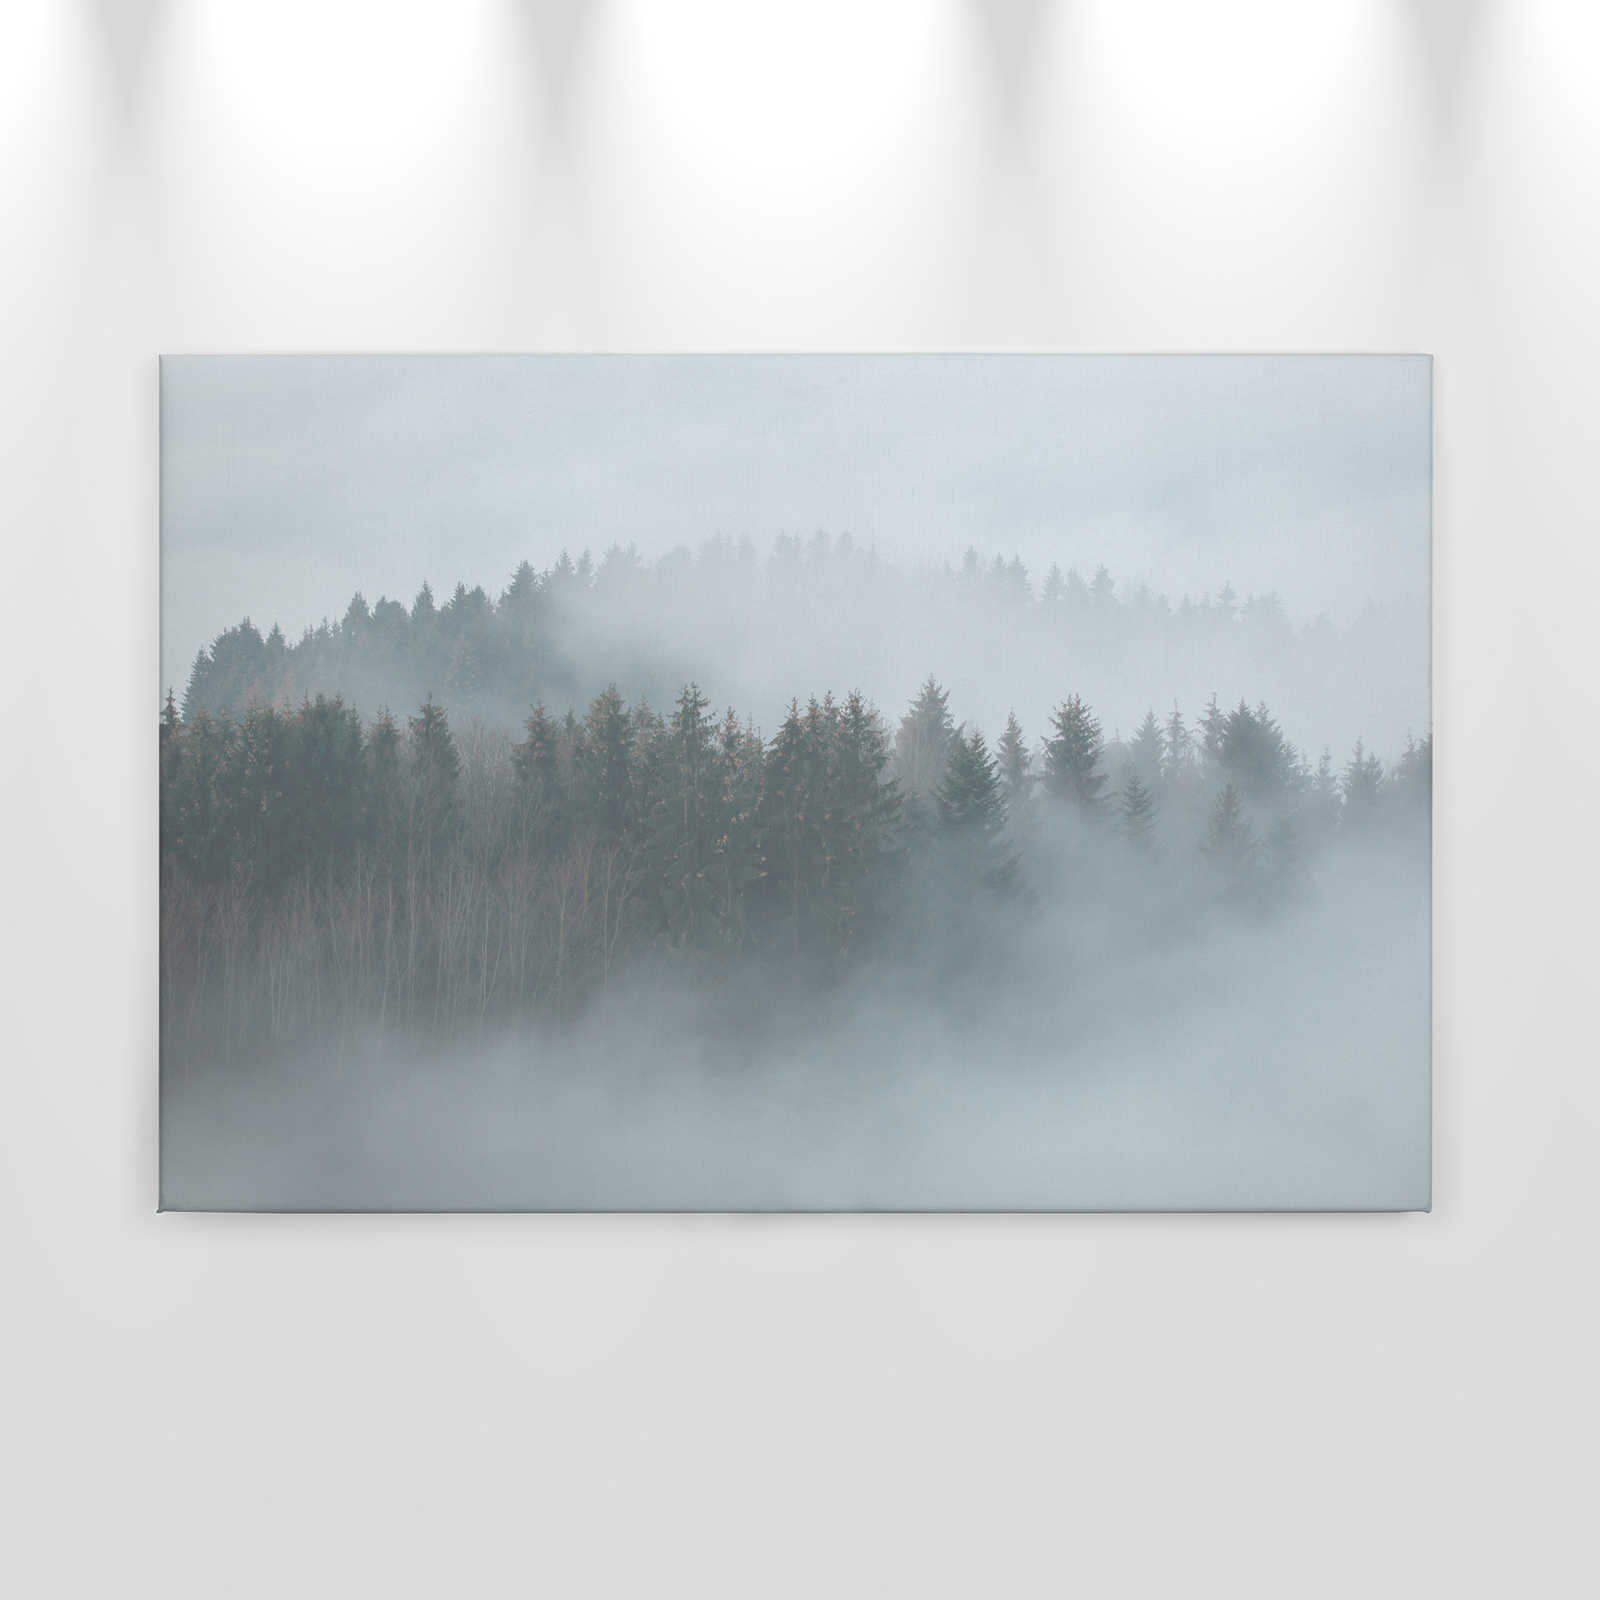             Canvas with mysterious forest in the mist - 0.90 m x 0.60 m
        